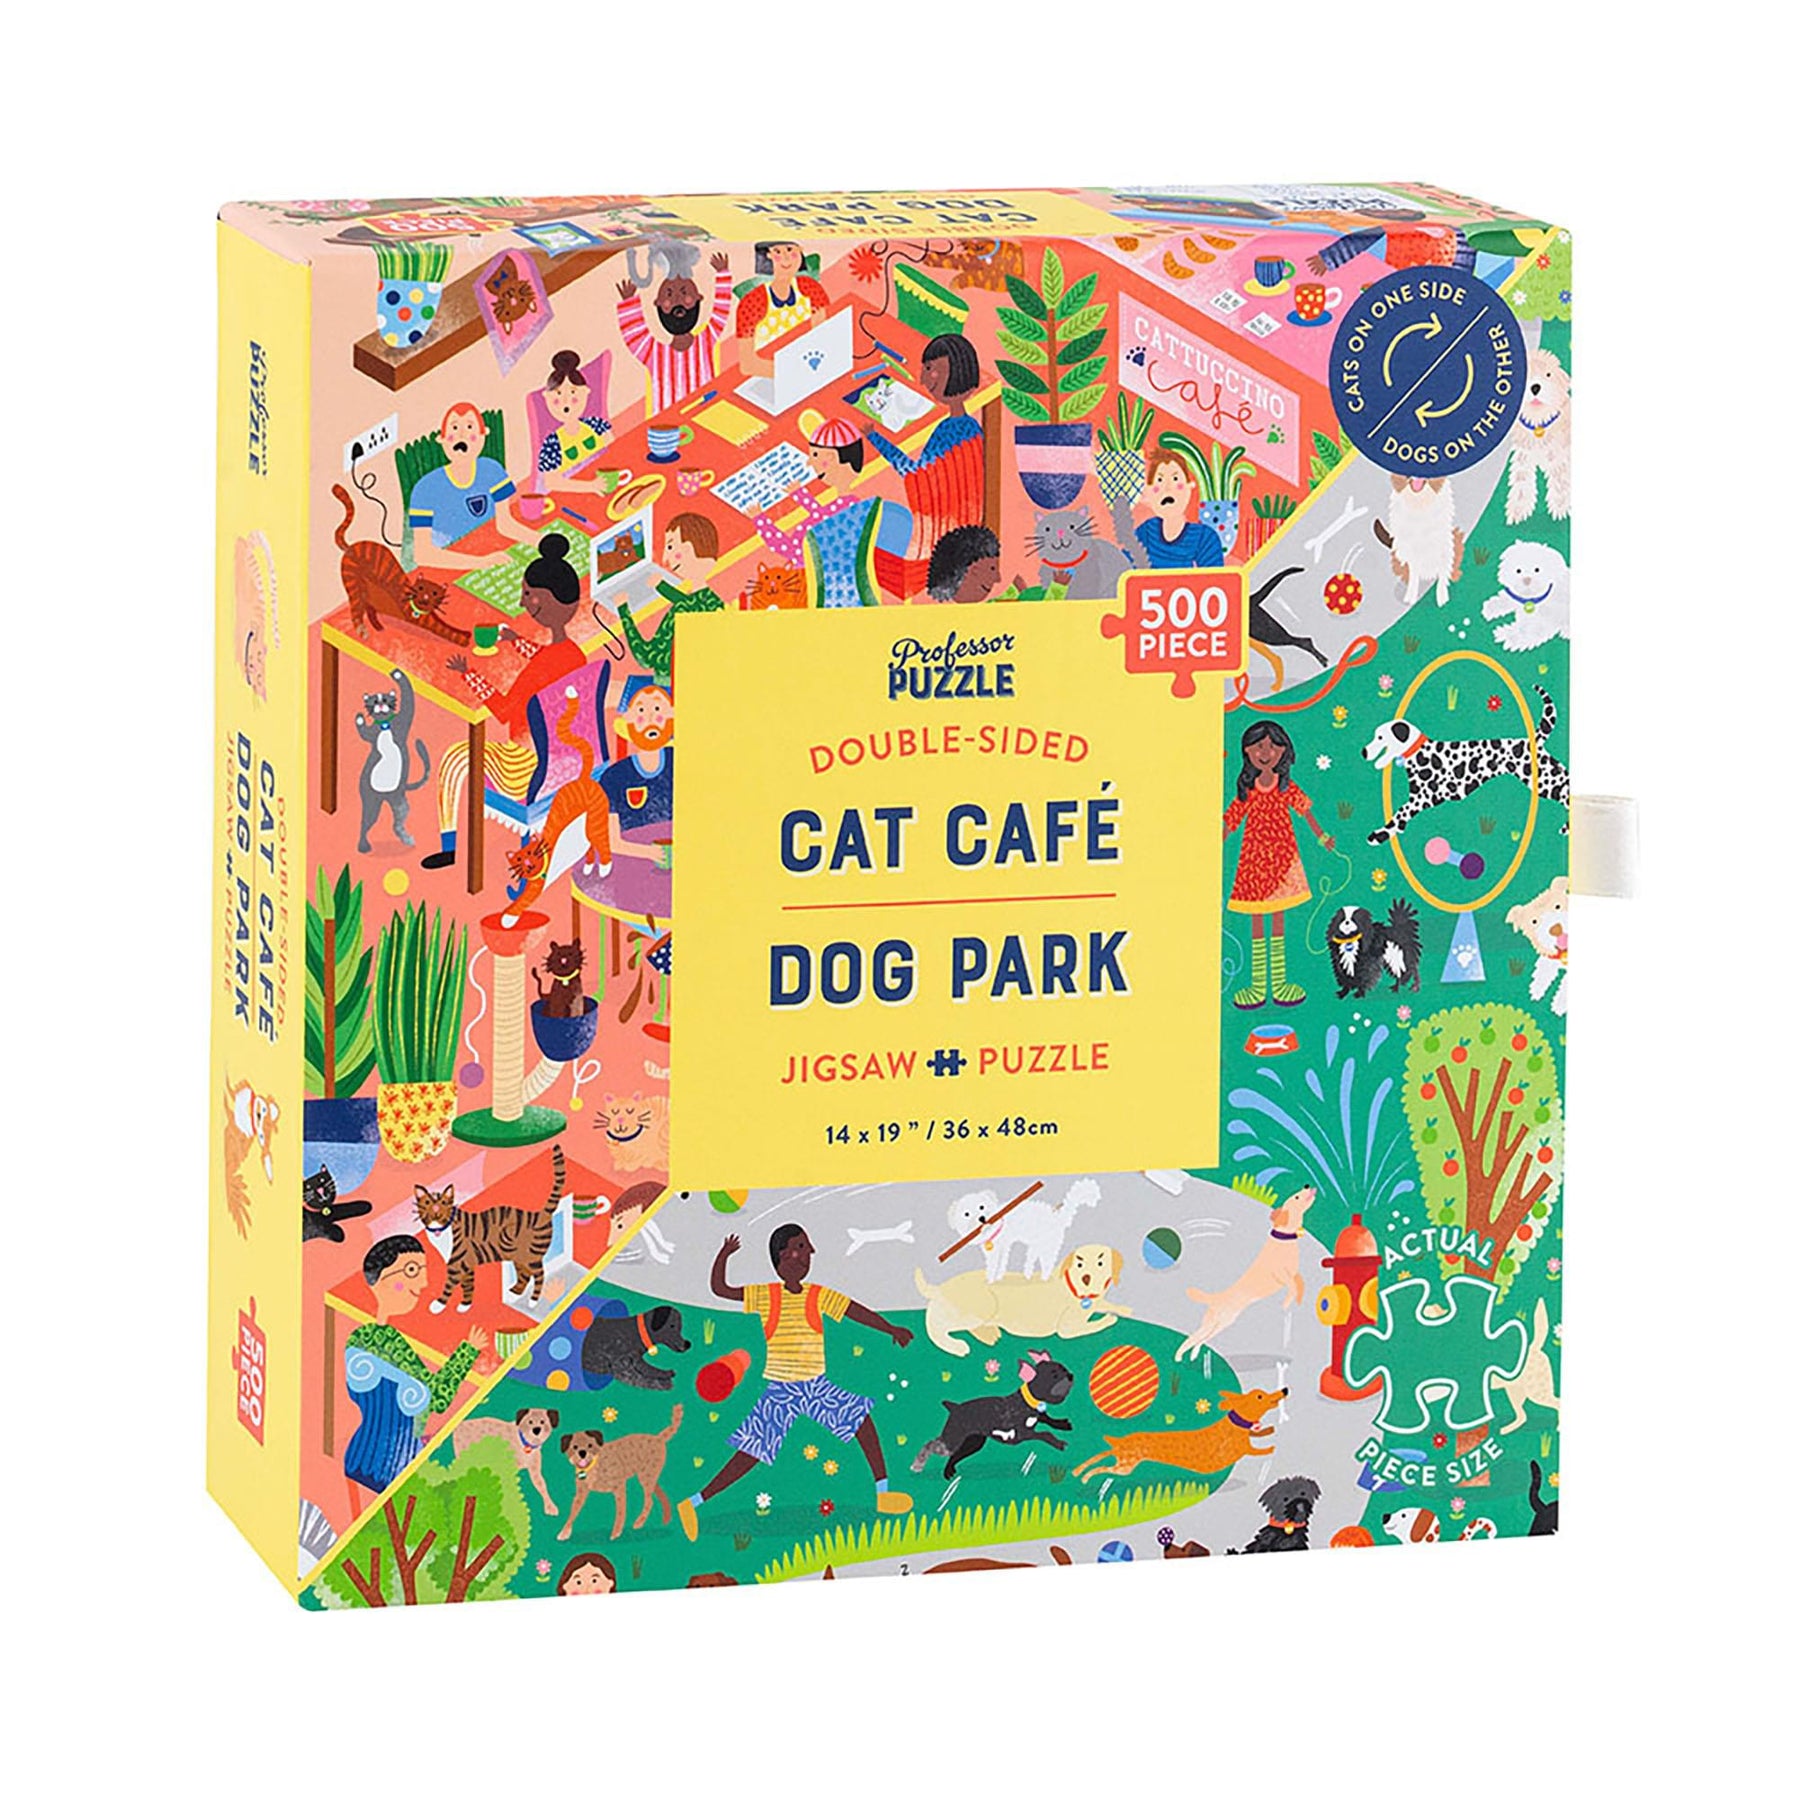 Cat Cafe & Dog Park Double Sided 500 Piece Jigsaw Puzzle